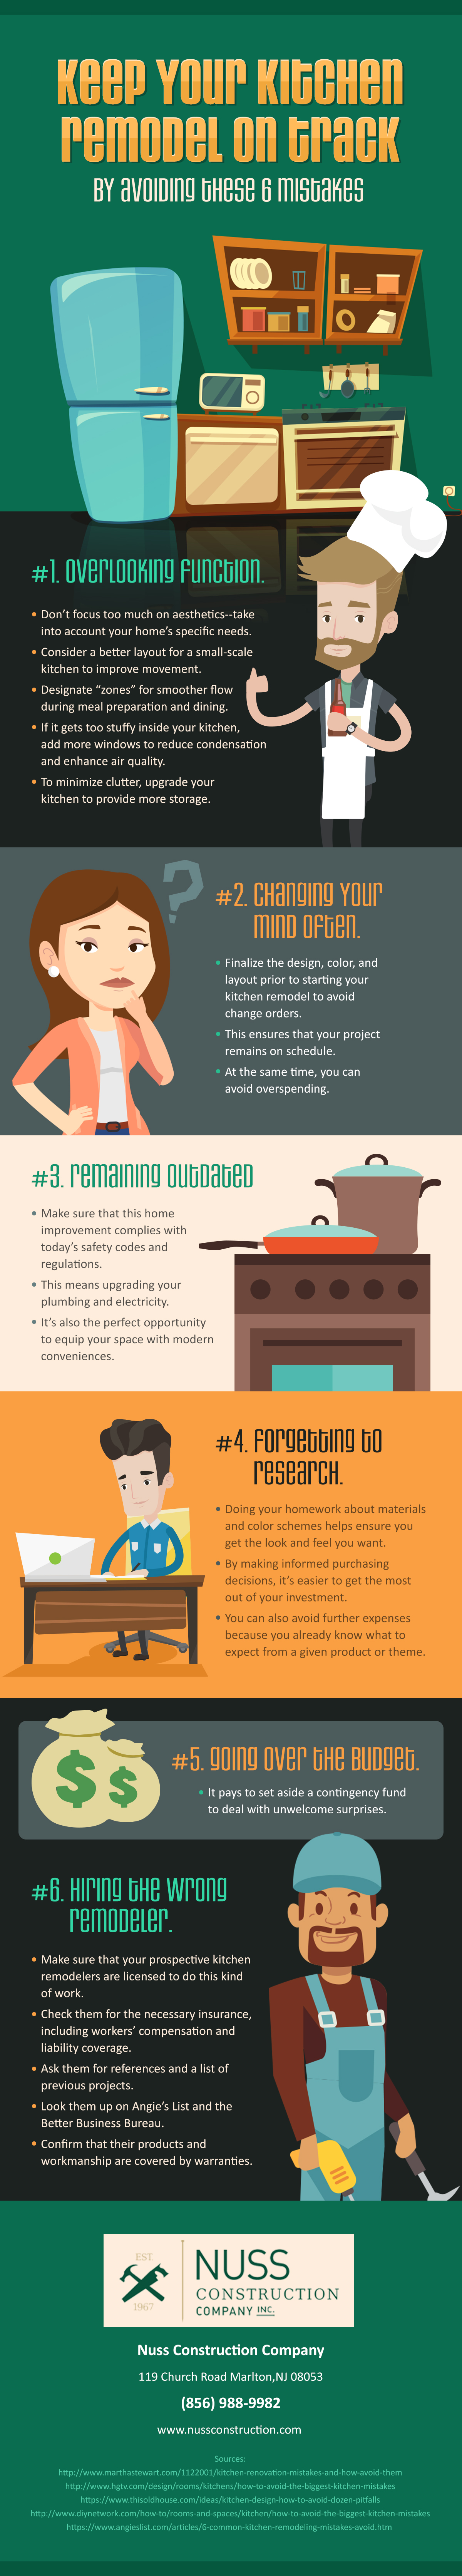 Infographics – Keeping Your Kitchen Remodel on Track by Avoiding These 6 Mistakes